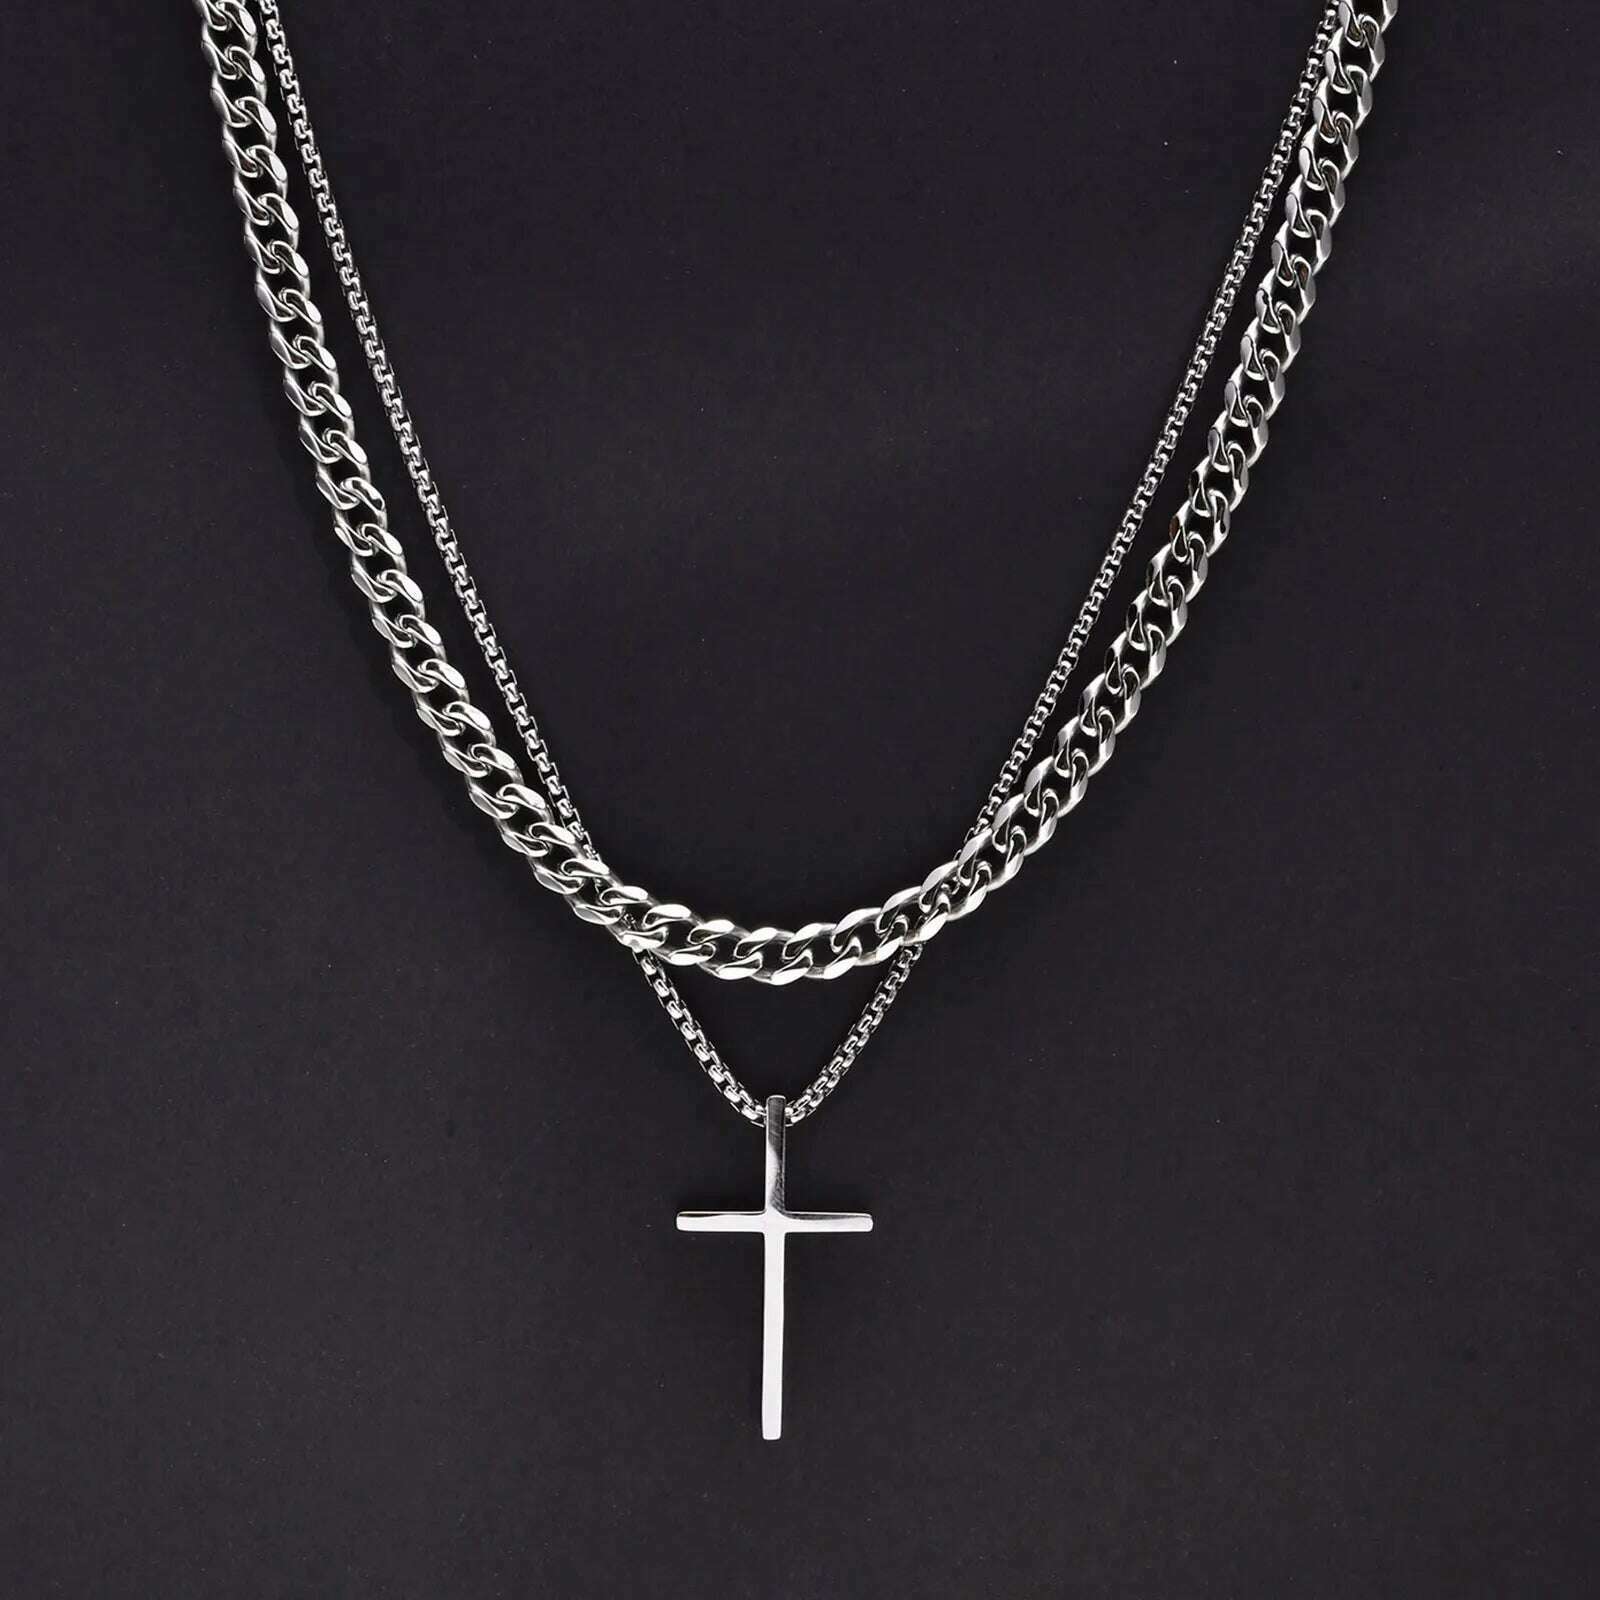 KIMLUD, Vnox Mens Cross Necklaces, Stainless Steel Layered Plain Cross Pendant, Rope Box Chain Necklace, Simple Prayer Jesus Collar, NC-1035S NC-003S-55, KIMLUD Women's Clothes